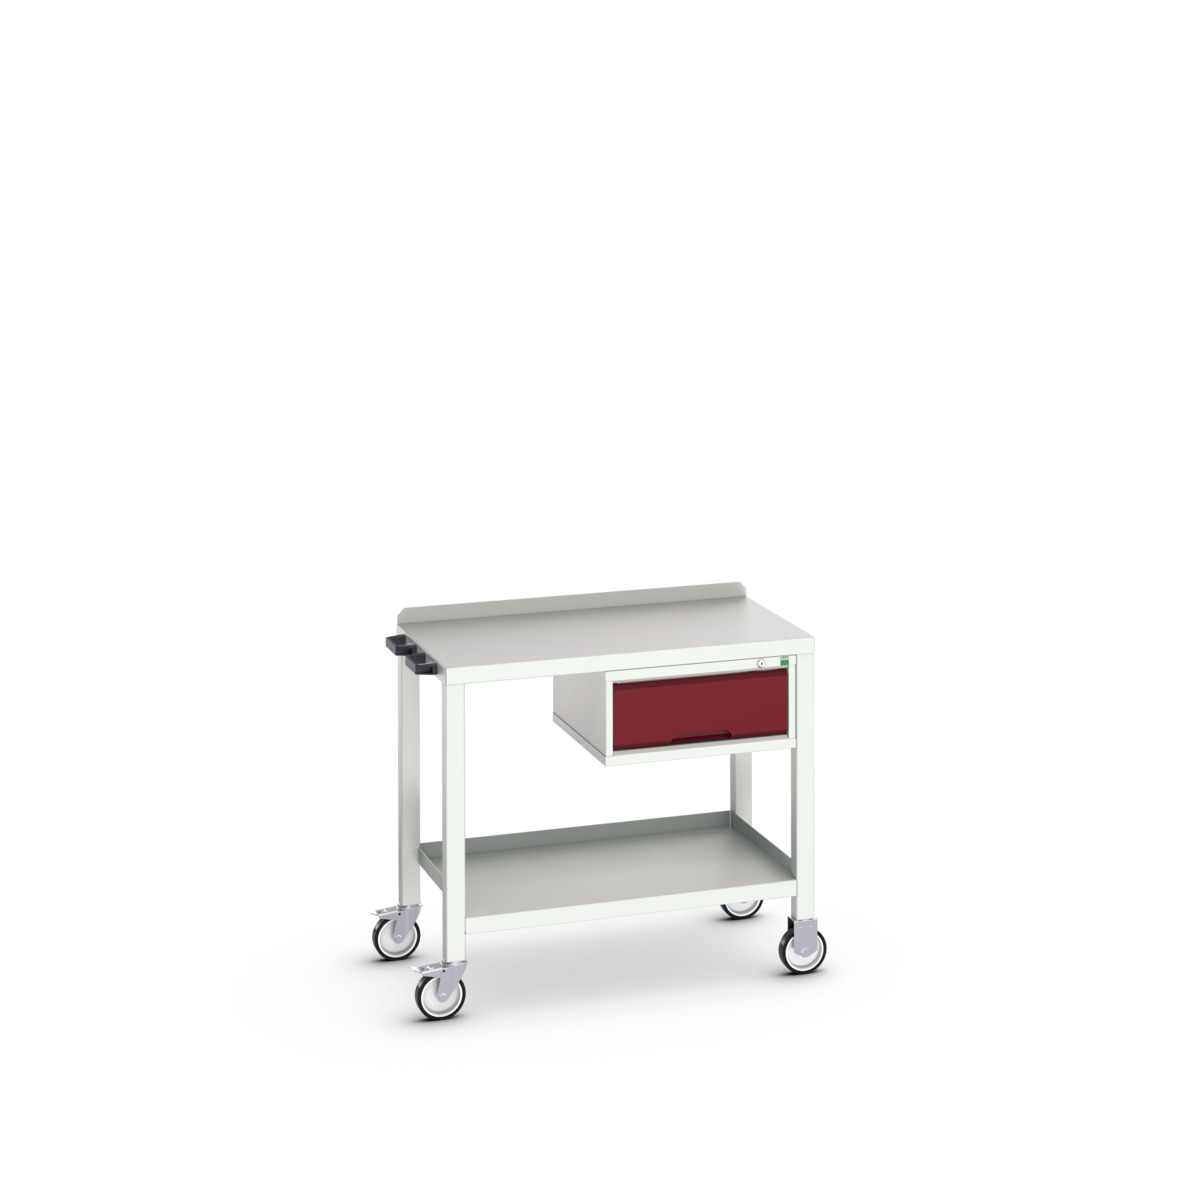 16922800.24 - verso mobile welded bench